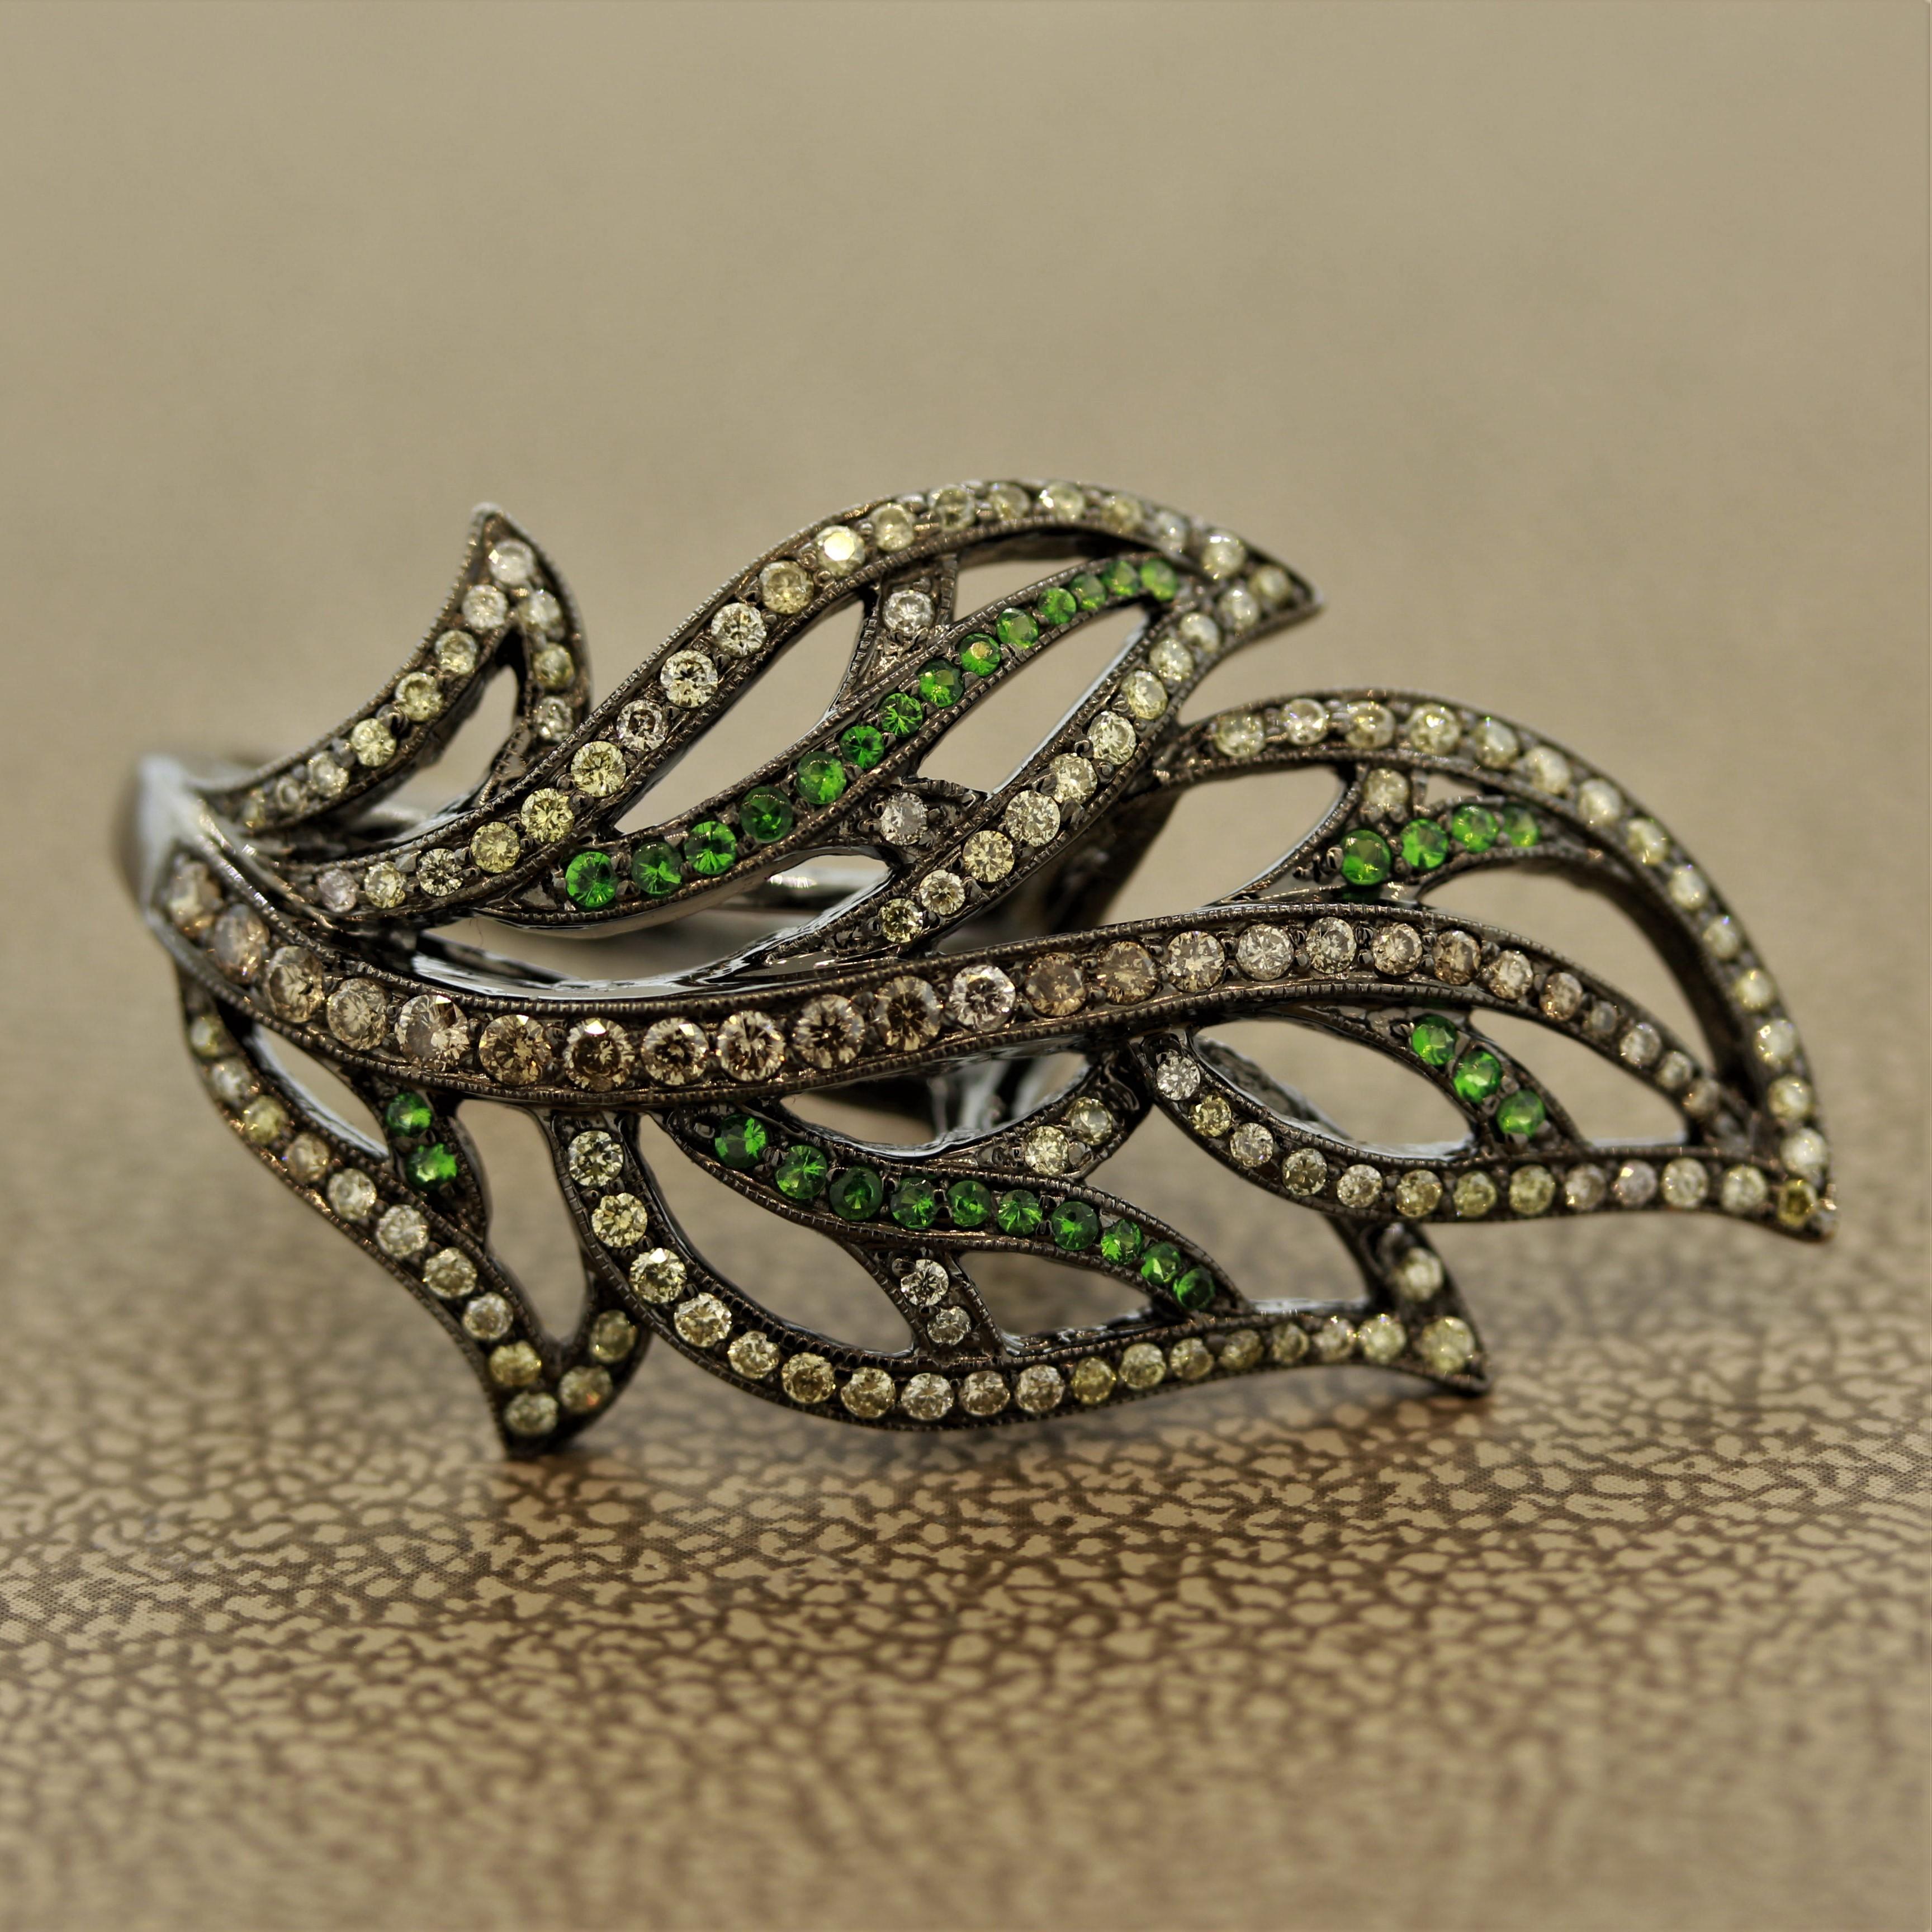 Get back to nature in this one of a kind leaf design ring.

This work of art has 0.99 carats of round brilliant cut diamonds and 0.19 carats of round brilliant cut tsavorites to give sparkle and glitter while you're wearing it on a daytime with a